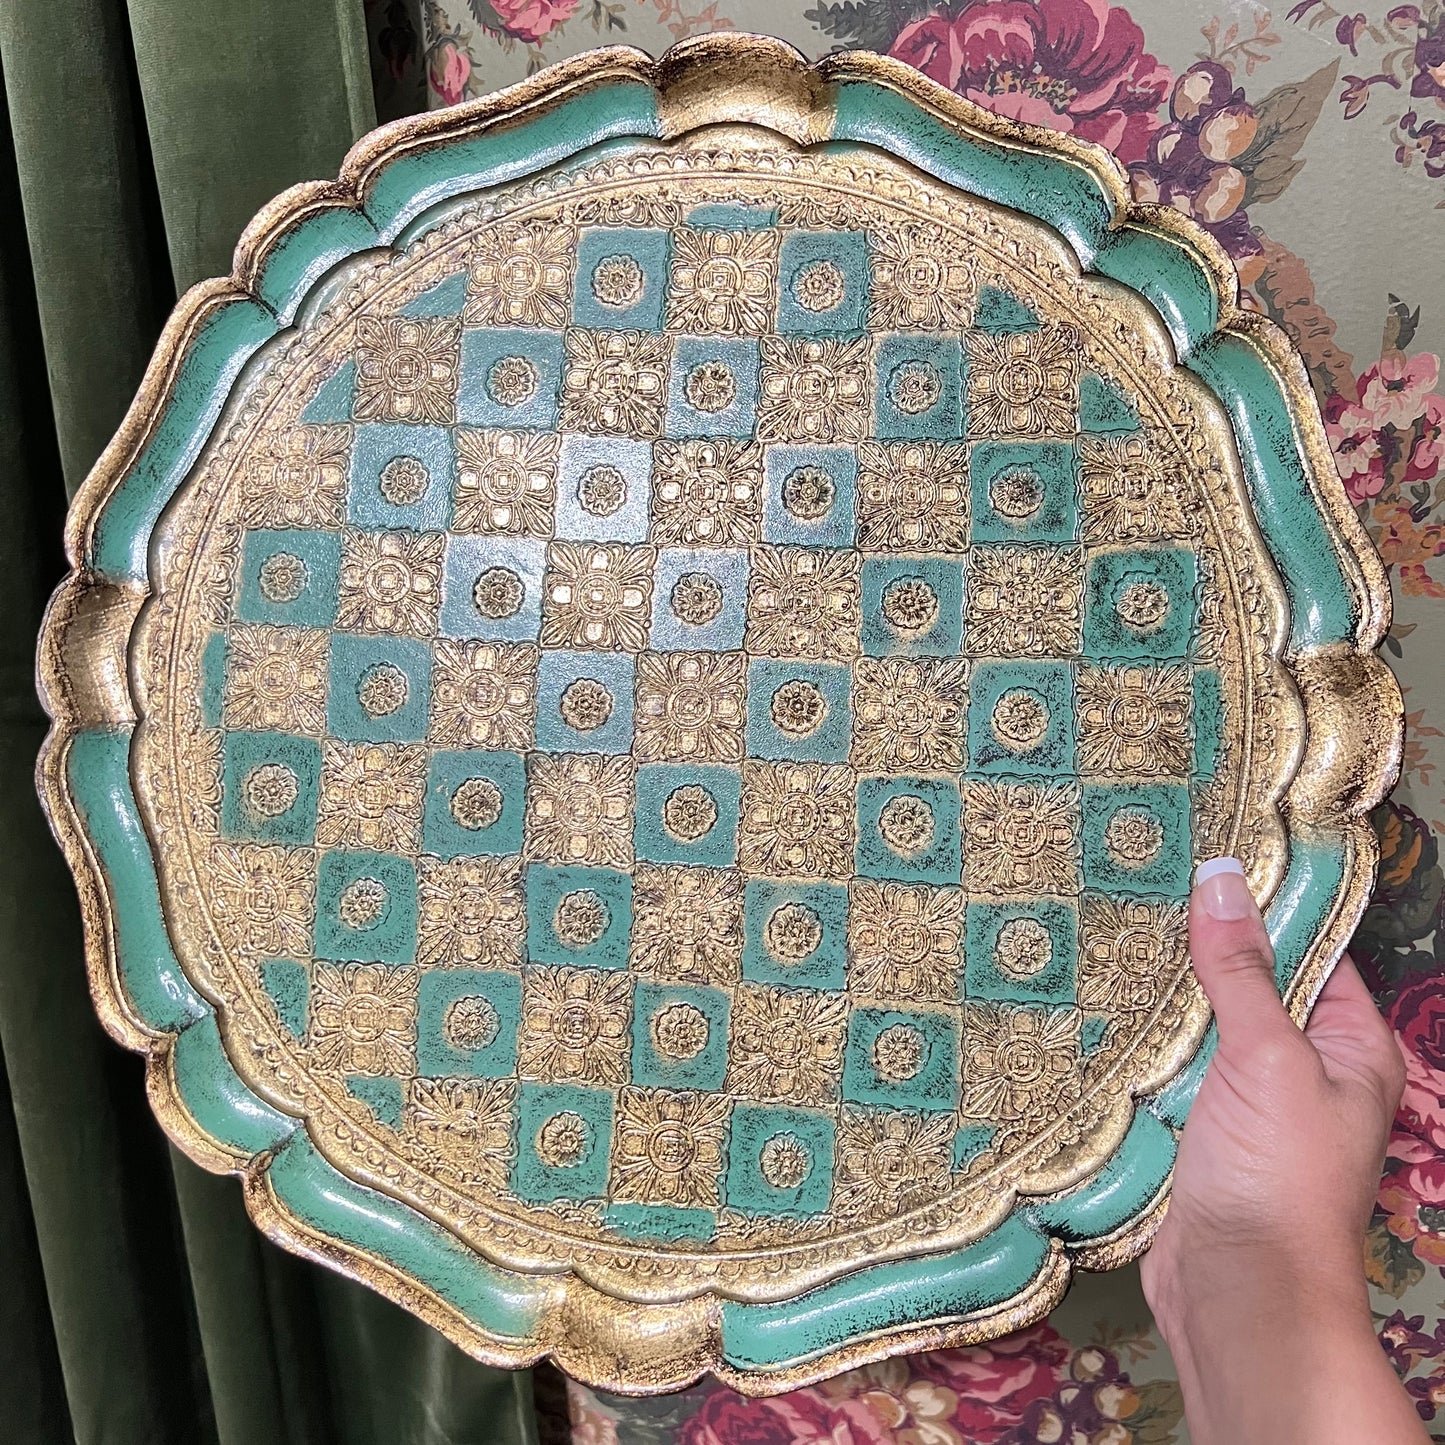 Vintage Italian Florentine Wood Round Gold and Green Serving Tray 15.5" Across